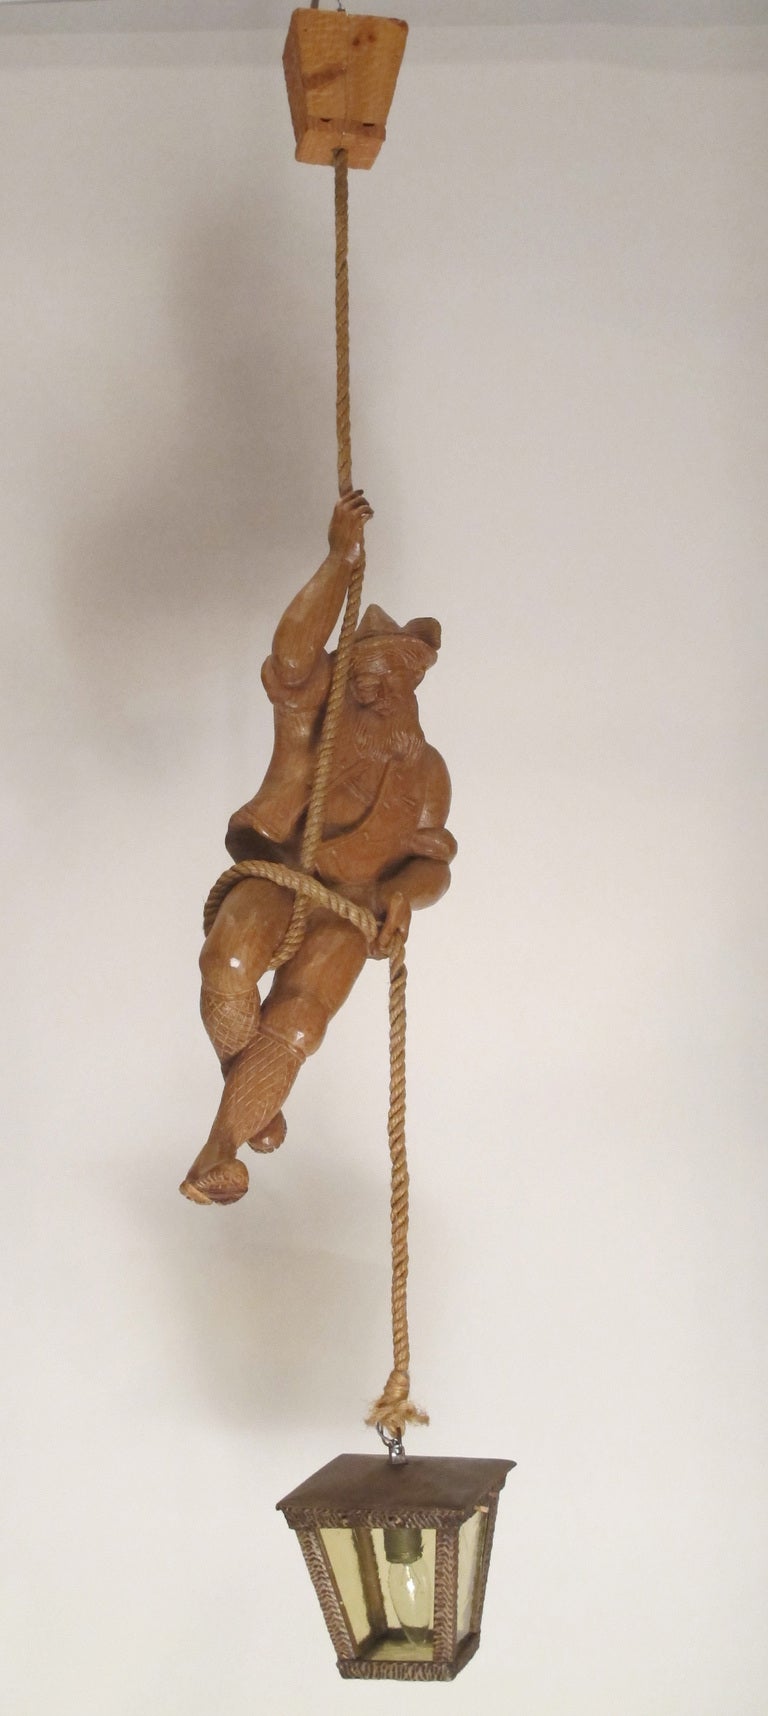 Hand-carved wood pendant light featuring a mountain climber on a rope with a carved wood and glass lantern suspended below him. A very detailed example. Dimensions below are for the figure, overall height is 46-1/2